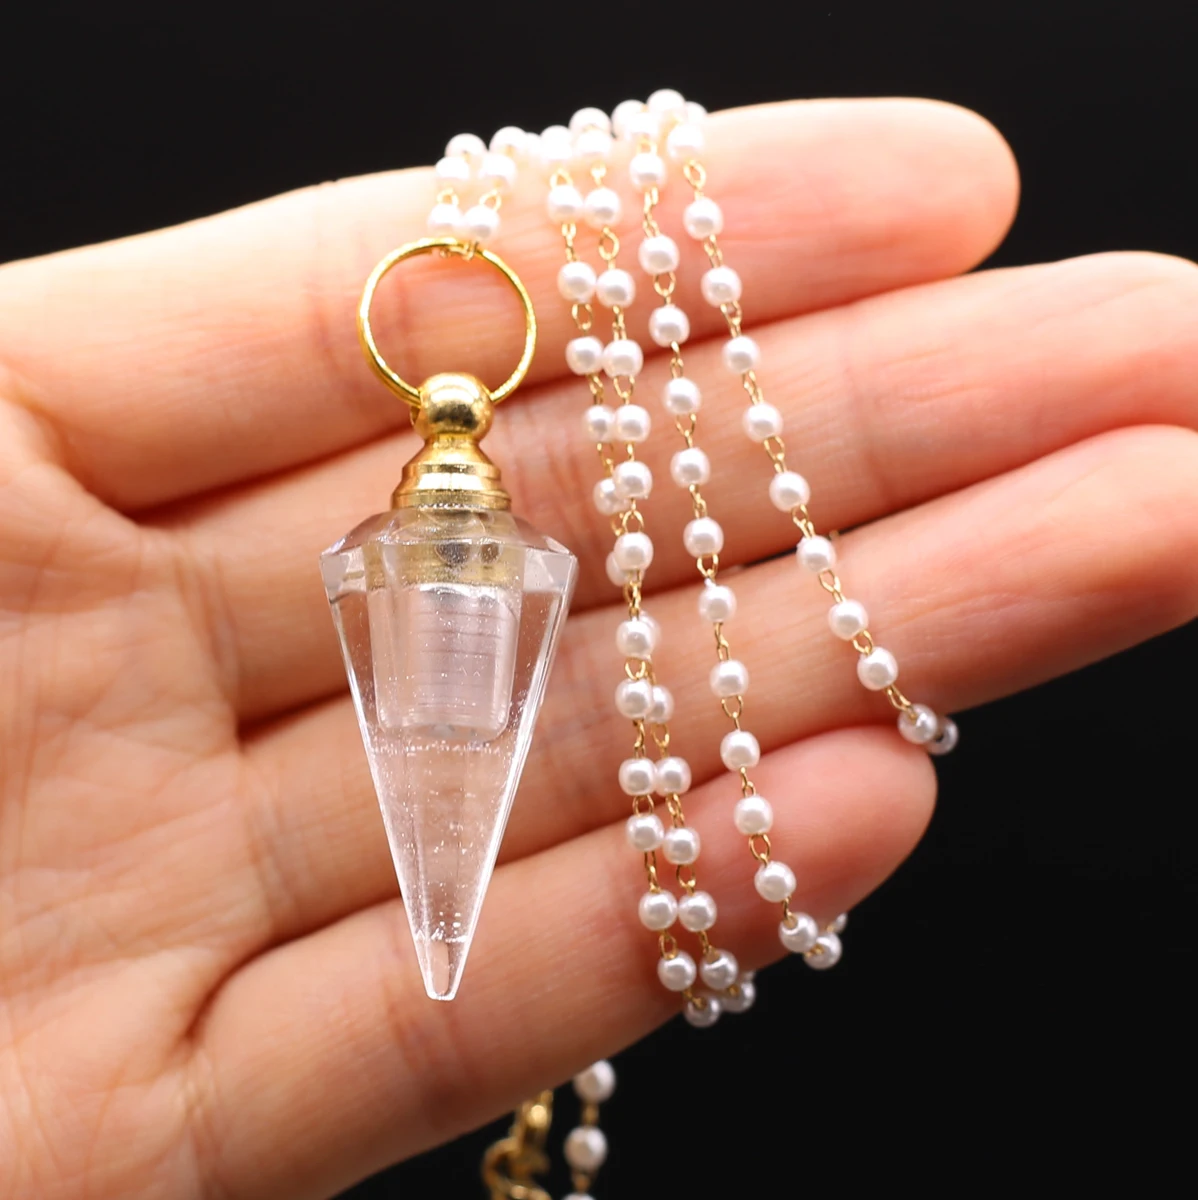 White Crystal Perfume Bottle Pendant Necklace Pearls Chain Natural Stone Clear Quartz Essential Oil Vial Necklaces Women Jewelry